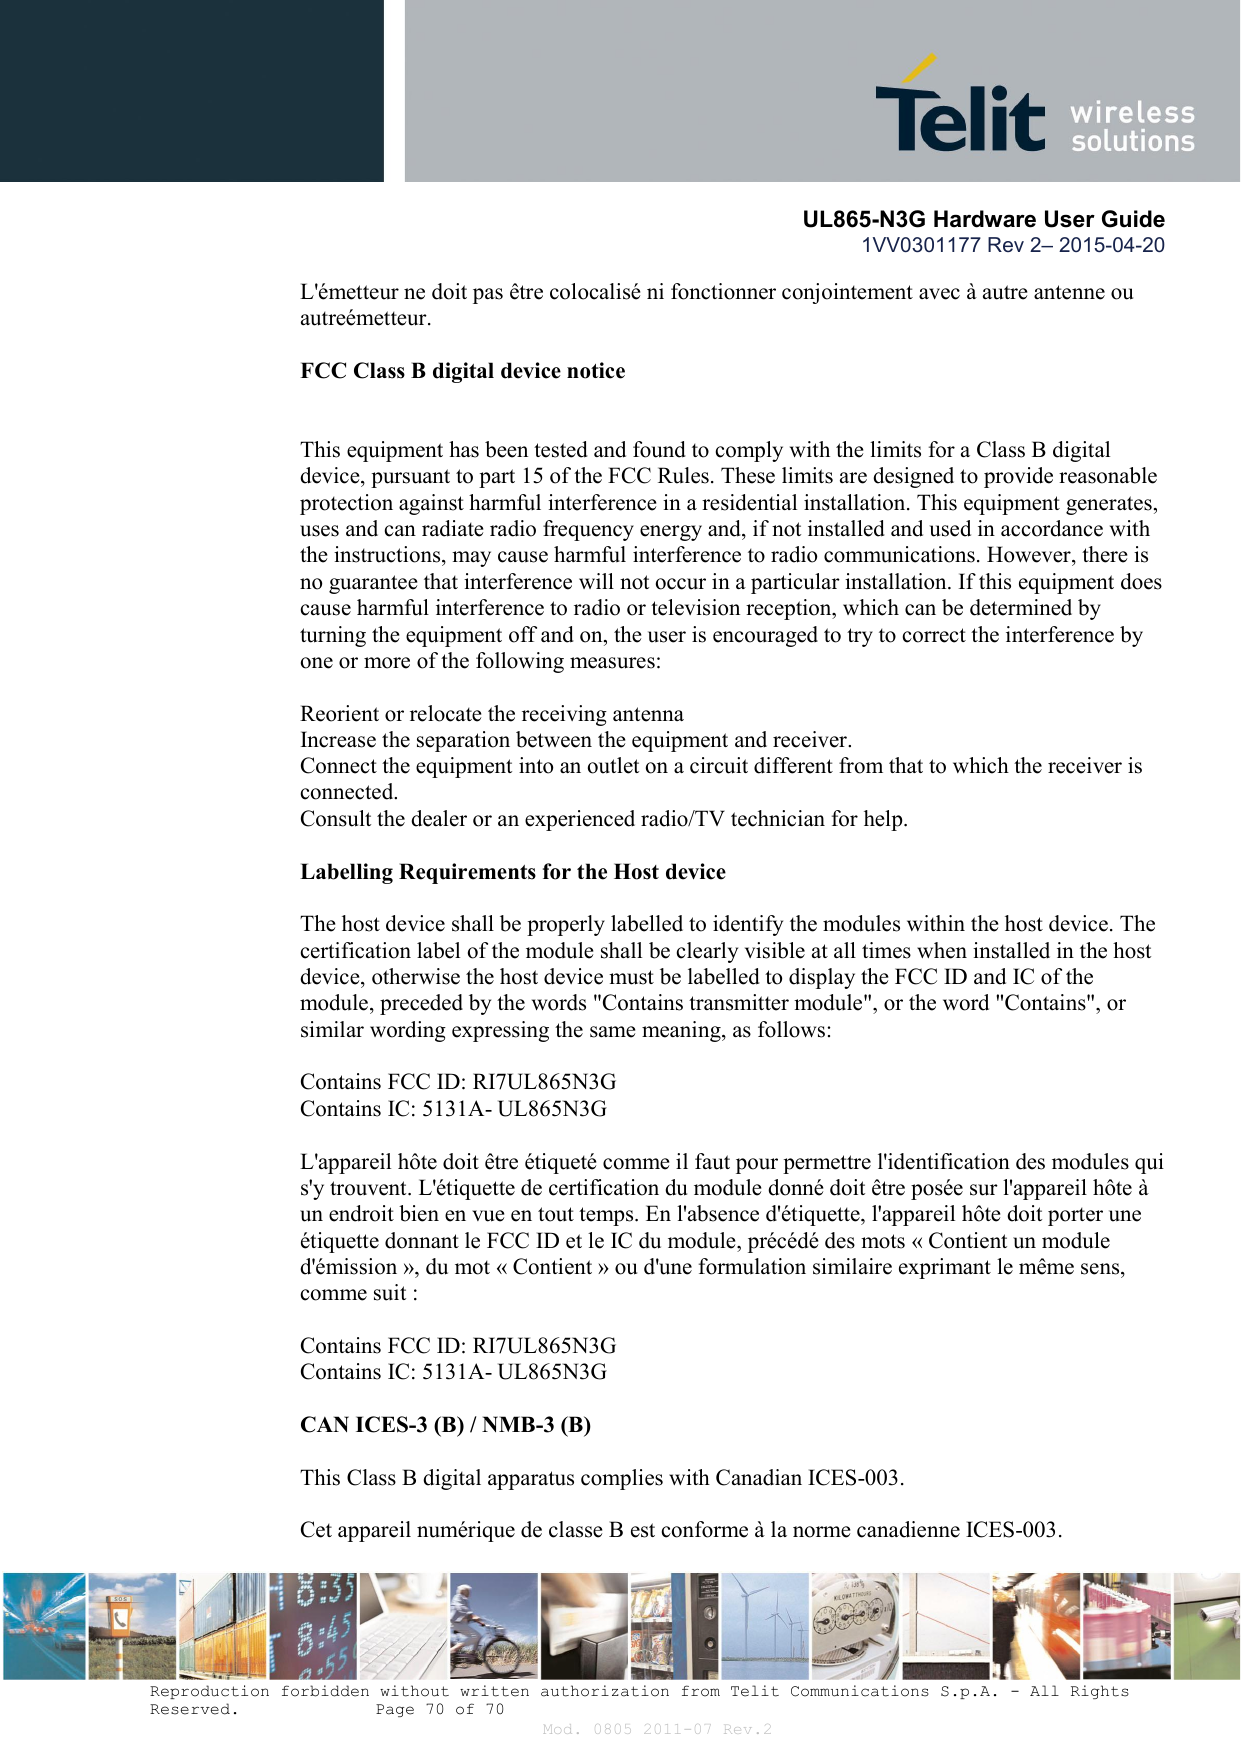       UL865-N3G Hardware User Guide 1VV0301177 Rev 2– 2015-04-20  Reproduction forbidden without written authorization from Telit Communications S.p.A. - All Rights Reserved.    Page 70 of 70 Mod. 0805 2011-07 Rev.2 L&apos;émetteur ne doit pas être colocalisé ni fonctionner conjointement avec à autre antenne ou autreémetteur.  FCC Class B digital device notice   This equipment has been tested and found to comply with the limits for a Class B digital device, pursuant to part 15 of the FCC Rules. These limits are designed to provide reasonable protection against harmful interference in a residential installation. This equipment generates, uses and can radiate radio frequency energy and, if not installed and used in accordance with the instructions, may cause harmful interference to radio communications. However, there is no guarantee that interference will not occur in a particular installation. If this equipment does cause harmful interference to radio or television reception, which can be determined by turning the equipment off and on, the user is encouraged to try to correct the interference by one or more of the following measures:  Reorient or relocate the receiving antenna Increase the separation between the equipment and receiver. Connect the equipment into an outlet on a circuit different from that to which the receiver is connected. Consult the dealer or an experienced radio/TV technician for help.  Labelling Requirements for the Host device  The host device shall be properly labelled to identify the modules within the host device. The certification label of the module shall be clearly visible at all times when installed in the host device, otherwise the host device must be labelled to display the FCC ID and IC of the module, preceded by the words &quot;Contains transmitter module&quot;, or the word &quot;Contains&quot;, or similar wording expressing the same meaning, as follows:  Contains FCC ID: RI7UL865N3G Contains IC: 5131A- UL865N3G  L&apos;appareil hôte doit être étiqueté comme il faut pour permettre l&apos;identification des modules qui s&apos;y trouvent. L&apos;étiquette de certification du module donné doit être posée sur l&apos;appareil hôte à un endroit bien en vue en tout temps. En l&apos;absence d&apos;étiquette, l&apos;appareil hôte doit porter une étiquette donnant le FCC ID et le IC du module, précédé des mots « Contient un module d&apos;émission », du mot « Contient » ou d&apos;une formulation similaire exprimant le même sens, comme suit :  Contains FCC ID: RI7UL865N3G Contains IC: 5131A- UL865N3G  CAN ICES-3 (B) / NMB-3 (B)  This Class B digital apparatus complies with Canadian ICES-003.  Cet appareil numérique de classe B est conforme à la norme canadienne ICES-003.  